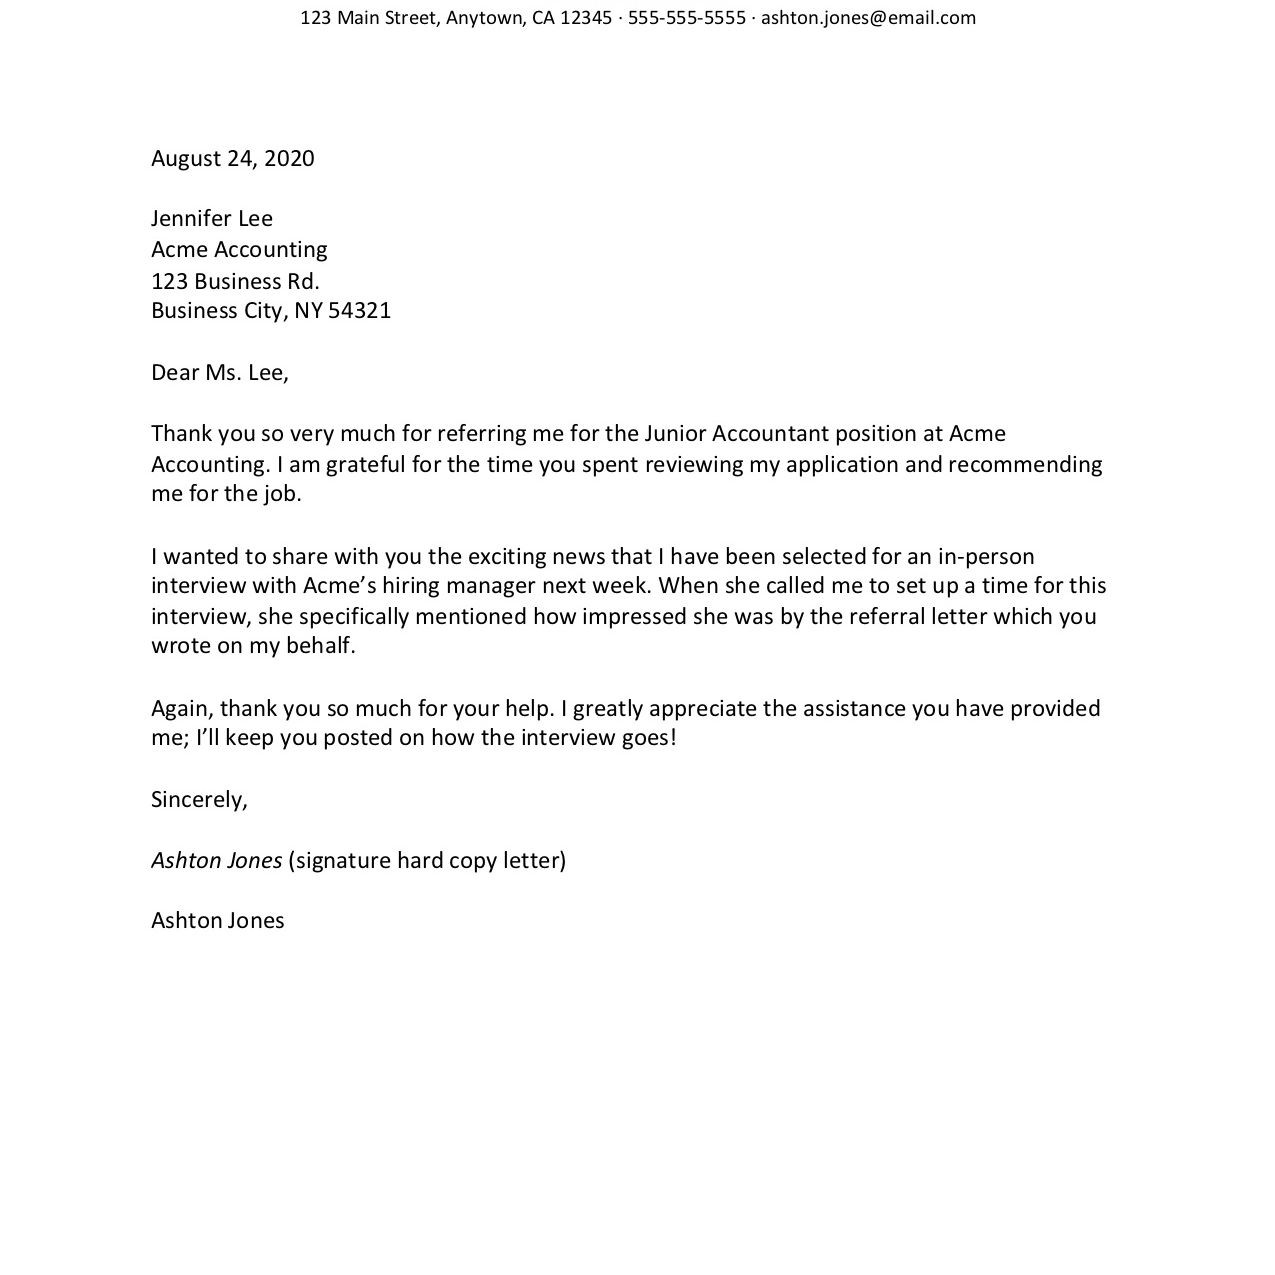 Thank You for Reviewing My Resume Samples Thank-you Letter for A Job Referral Examples and Tips